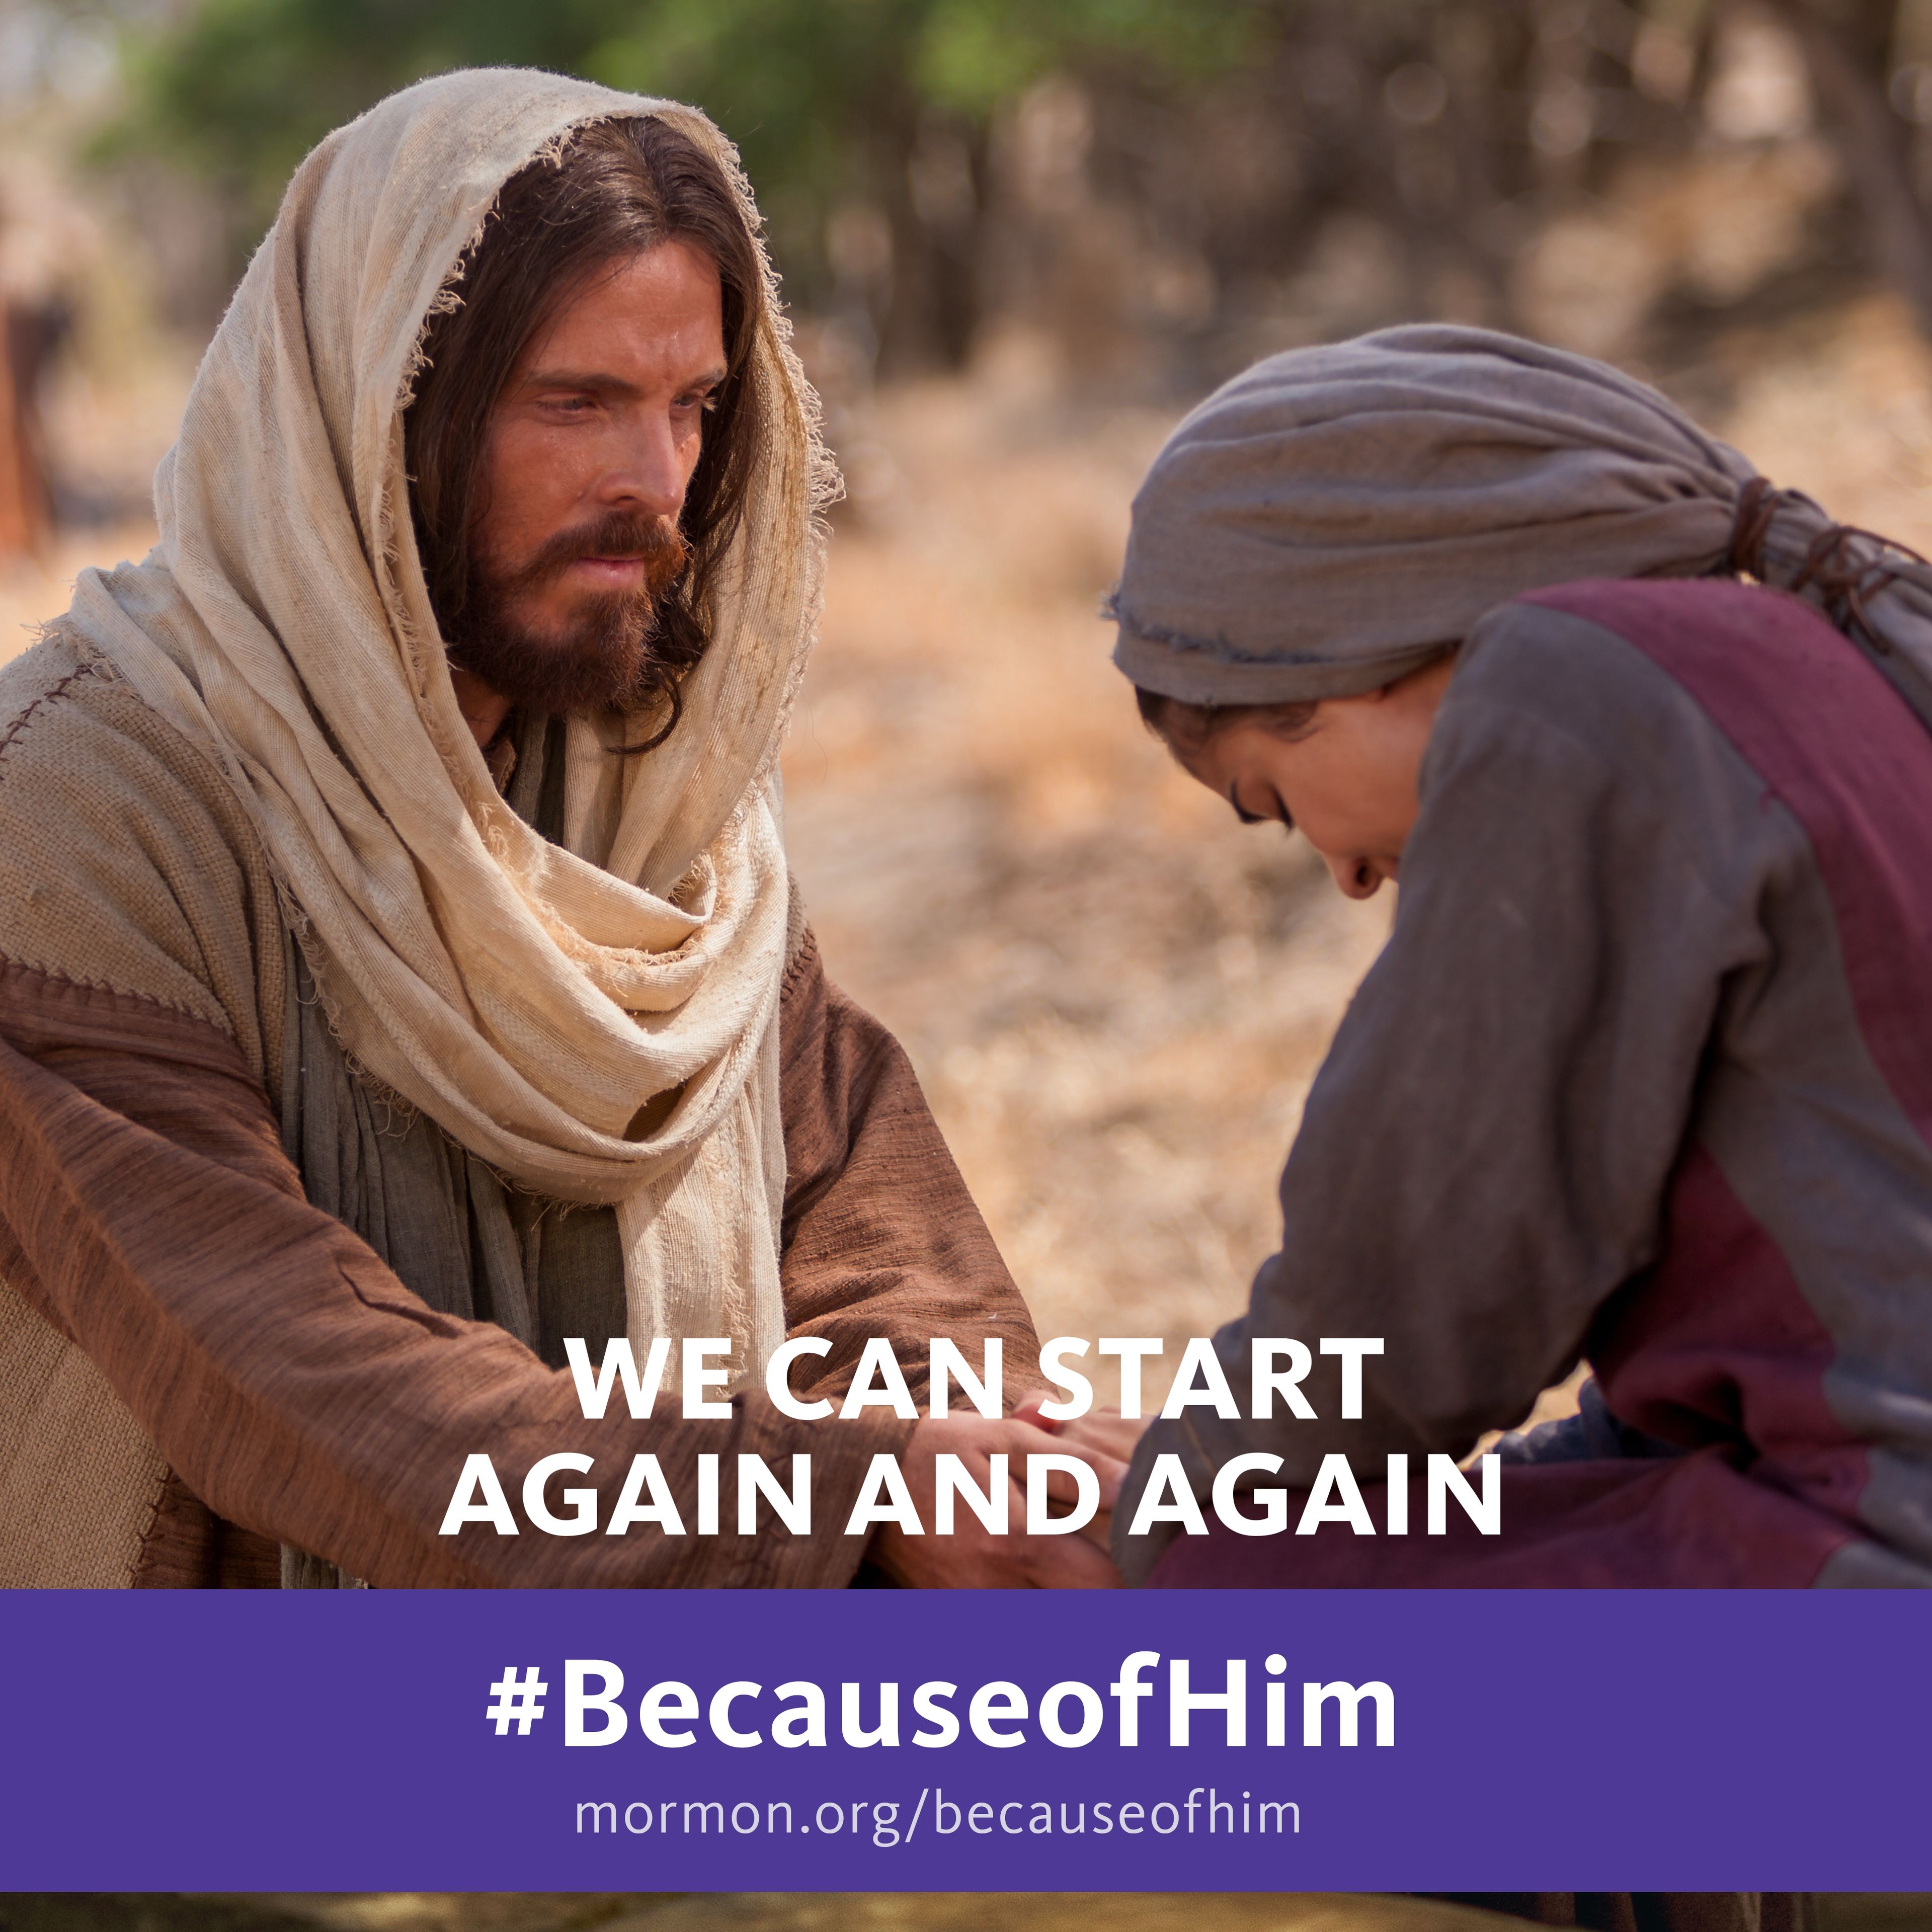 We can start again and again. #BecauseofHim, mormon.org/becauseofhim © undefined ipCode 1.